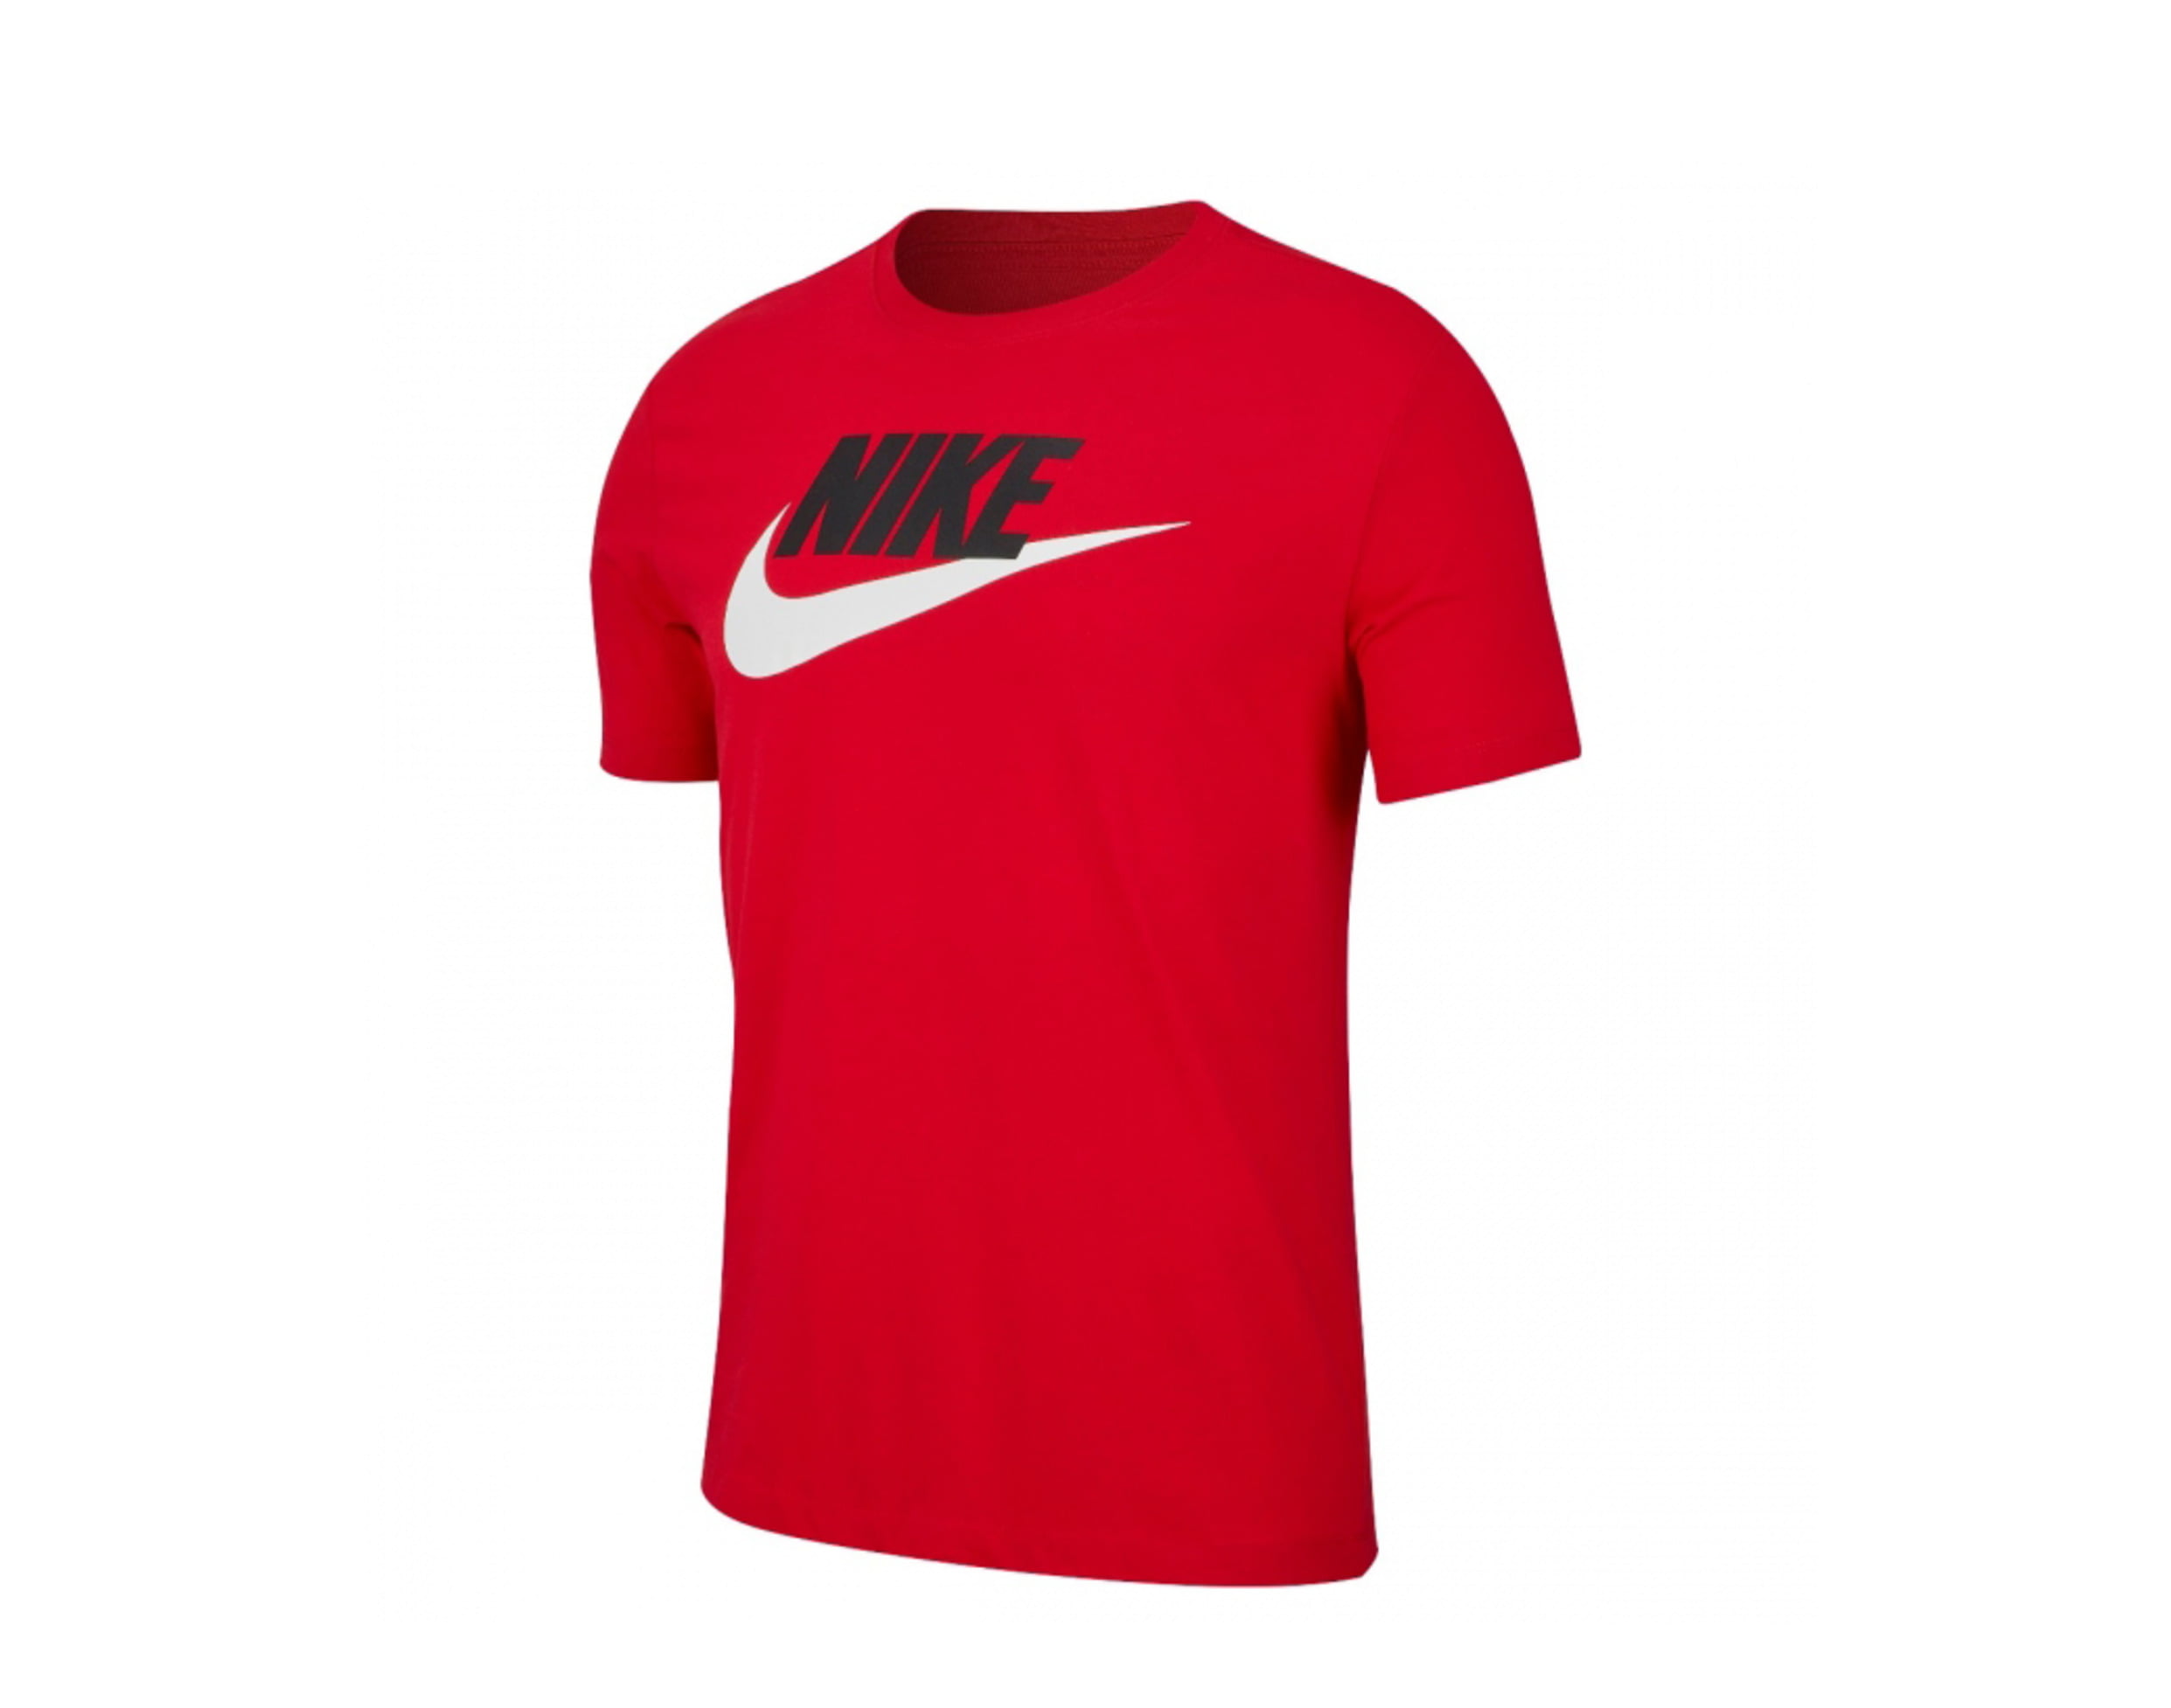 all red nike shirt